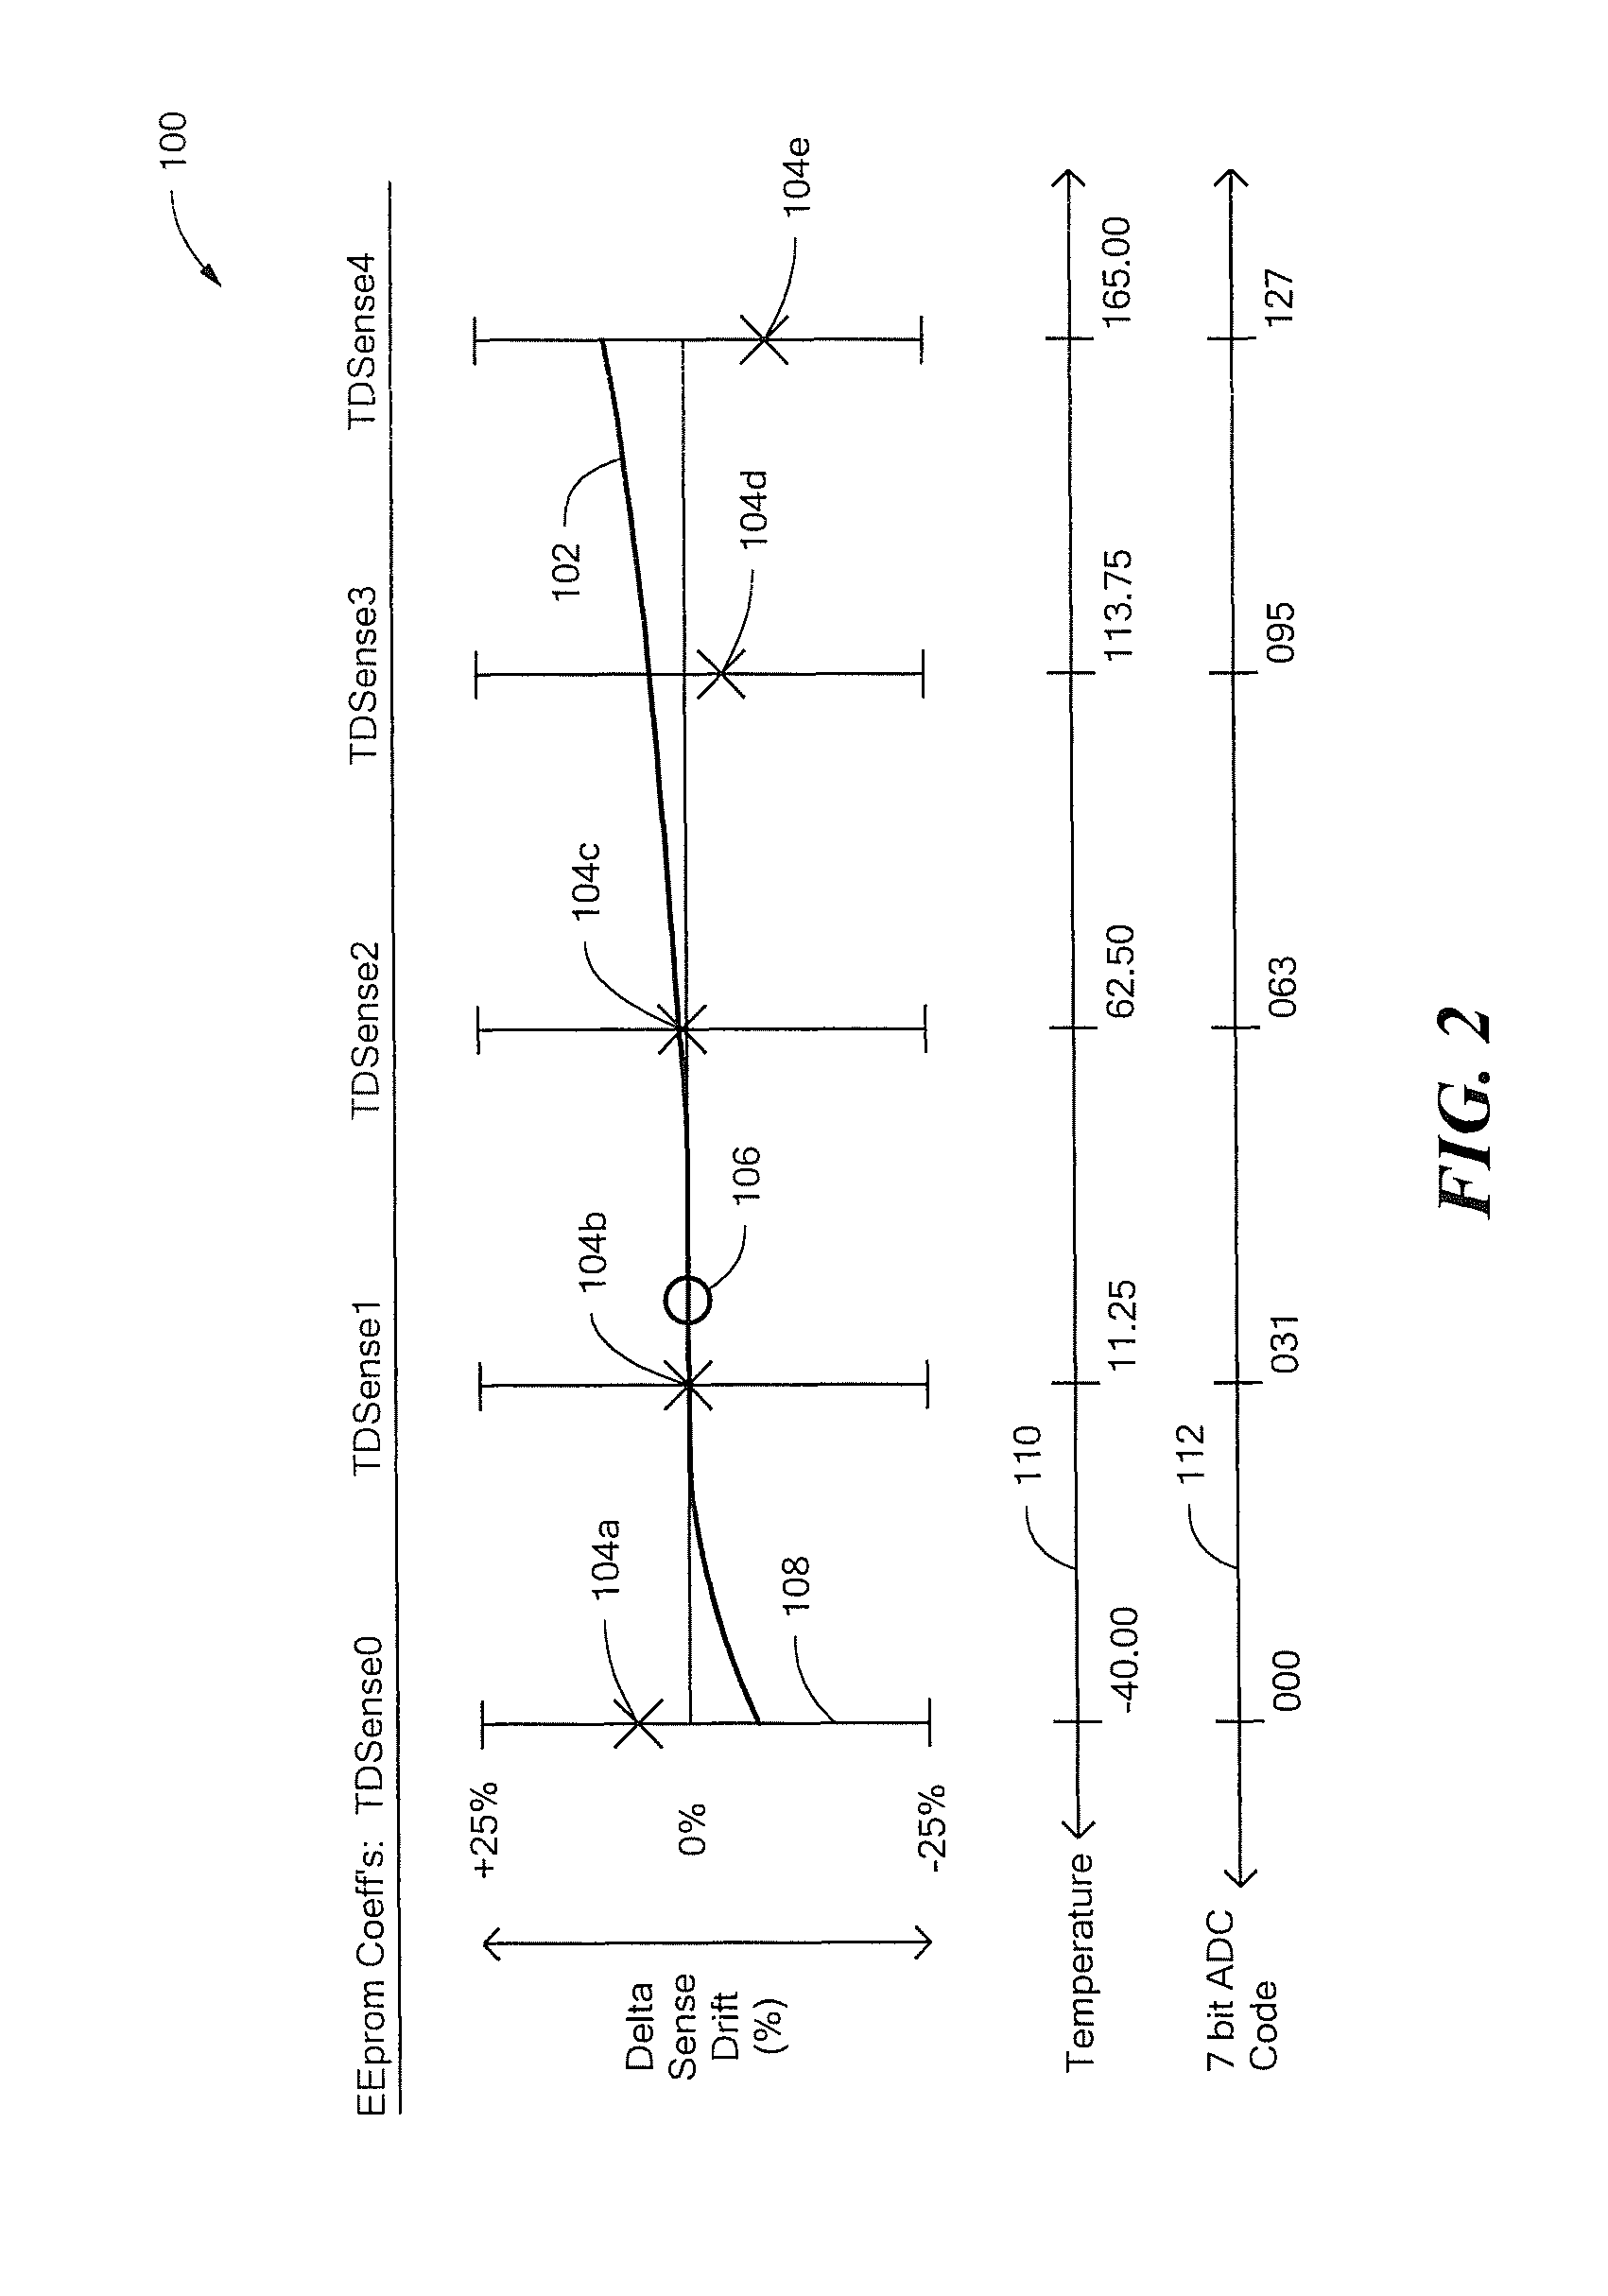 Magnetic field sensor and method used in a magnetic field sensor that adjusts a sensitivity and/or an offset over temperature